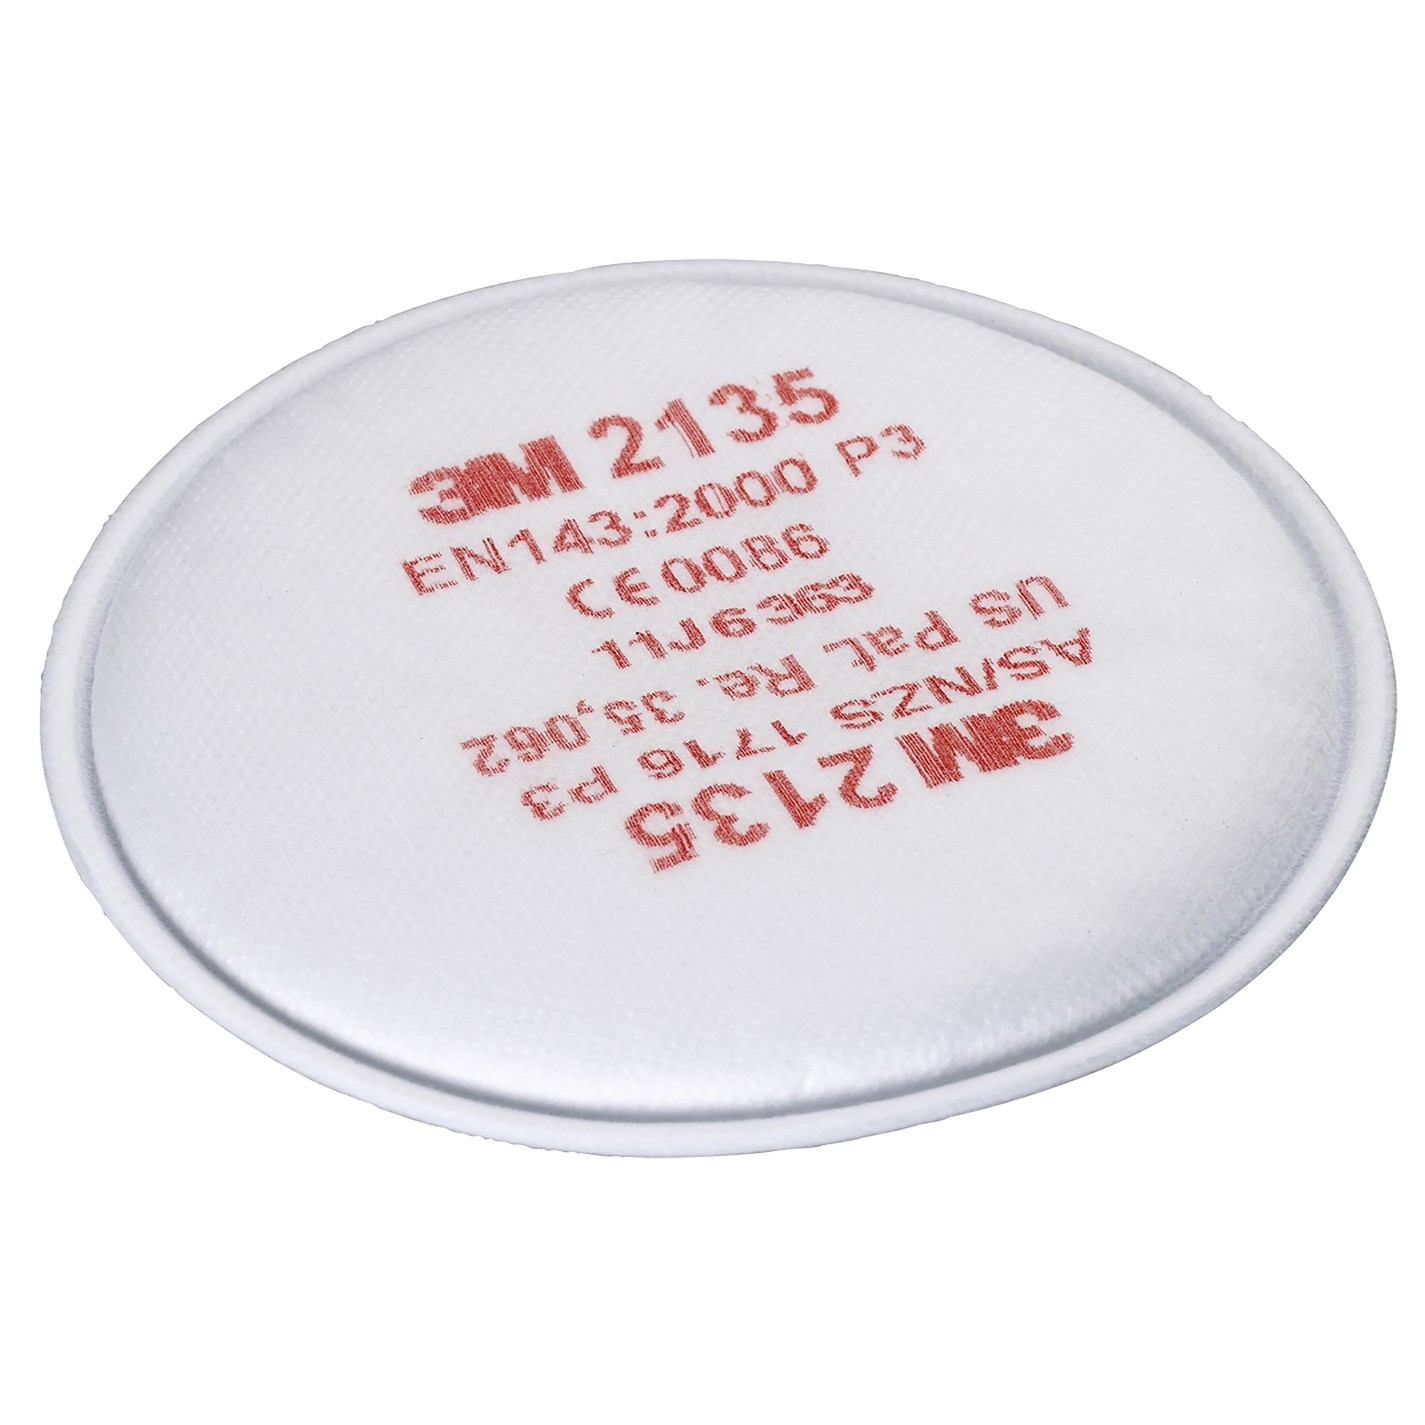 2 3M 2135 P3 PARTICULATE FILTERS